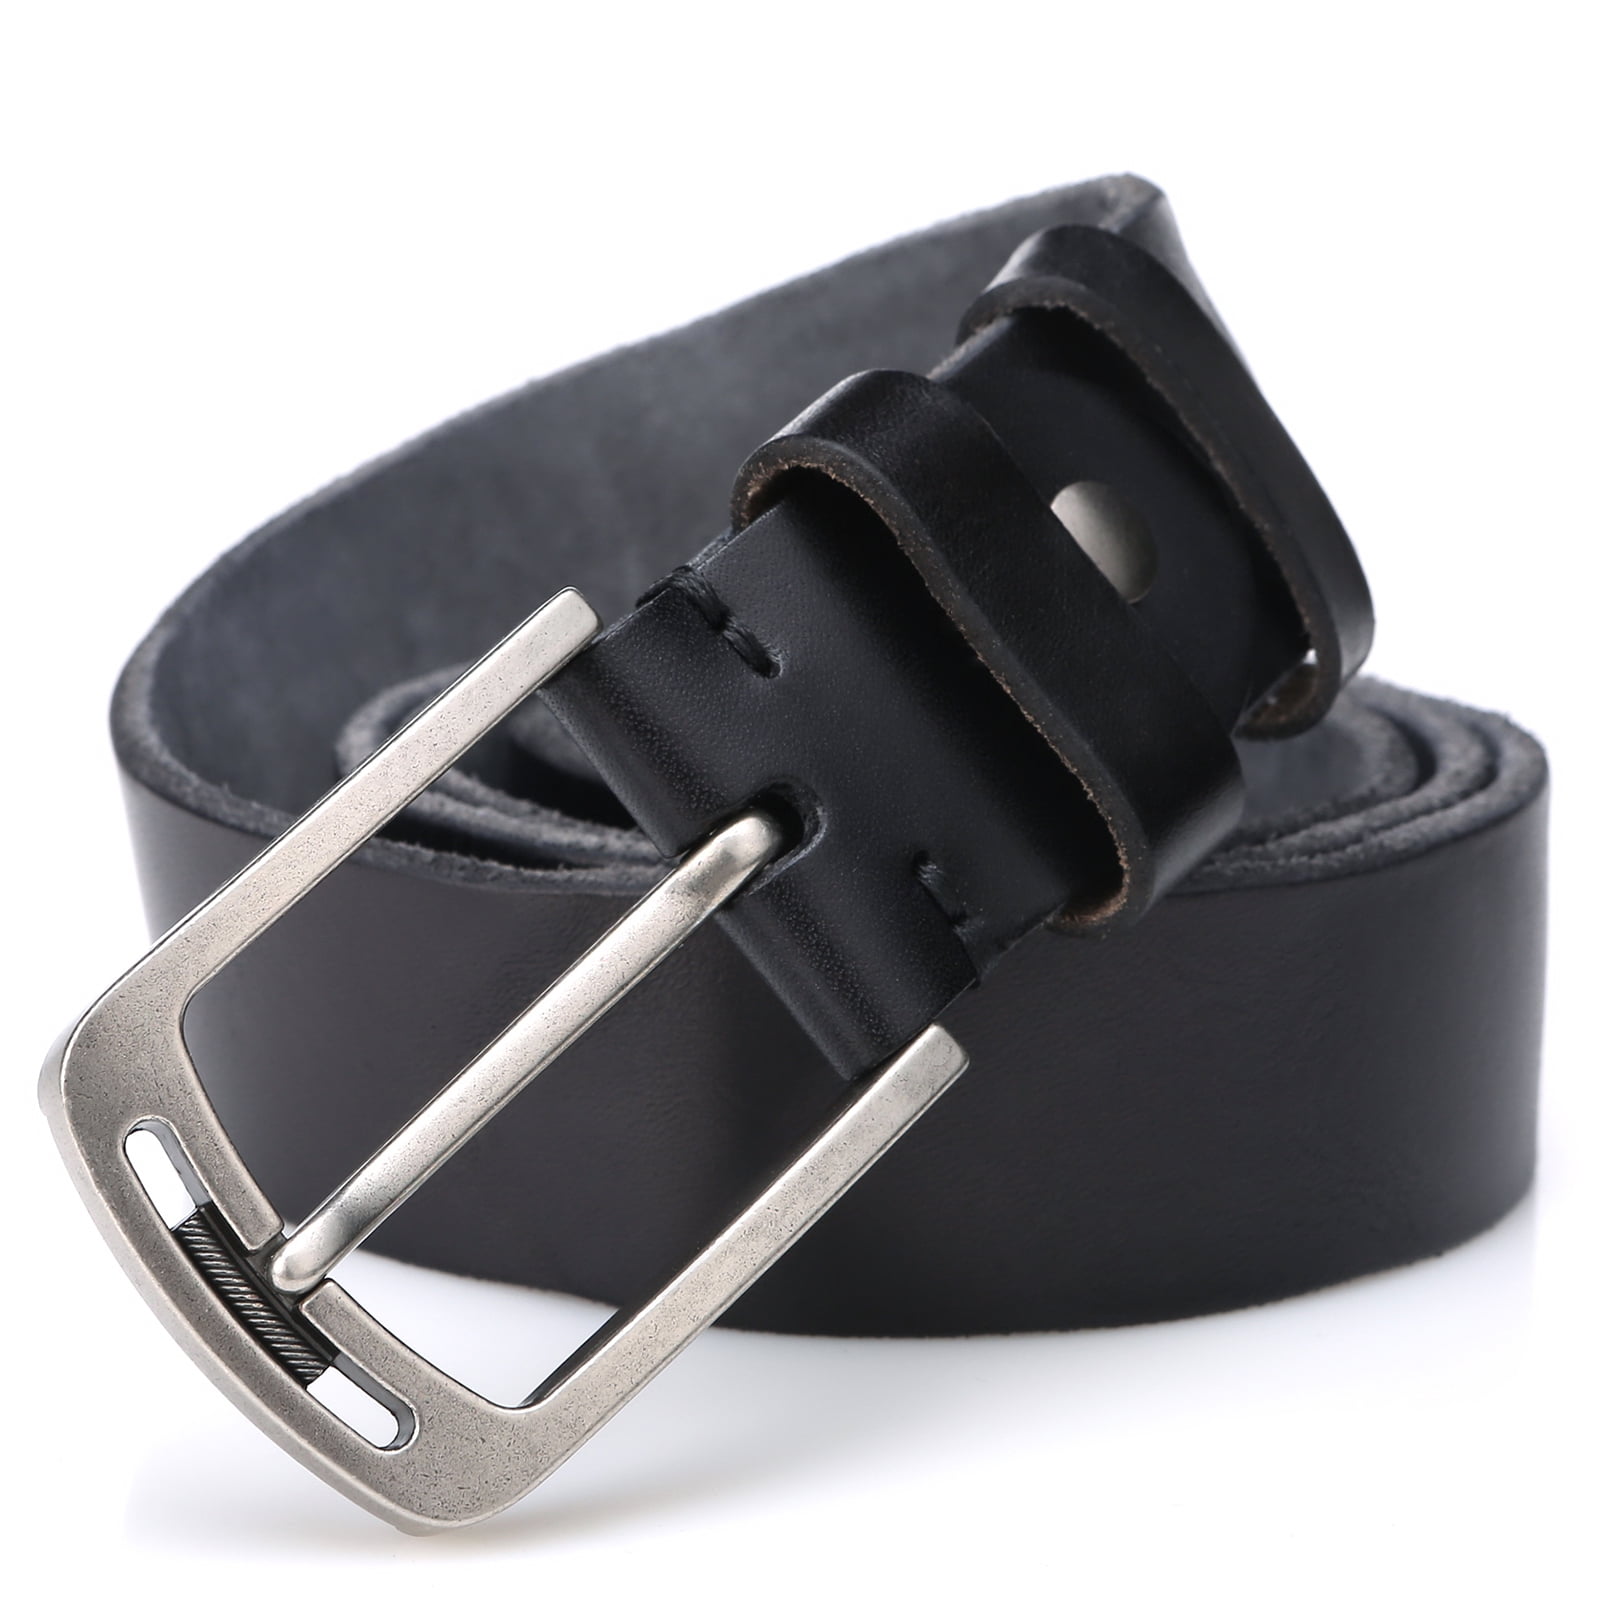 mens soft cow Genuine leather belt for men with black color Grid  pattern,1.5'' wide 51.2 inch length (black) at  Men's Clothing store